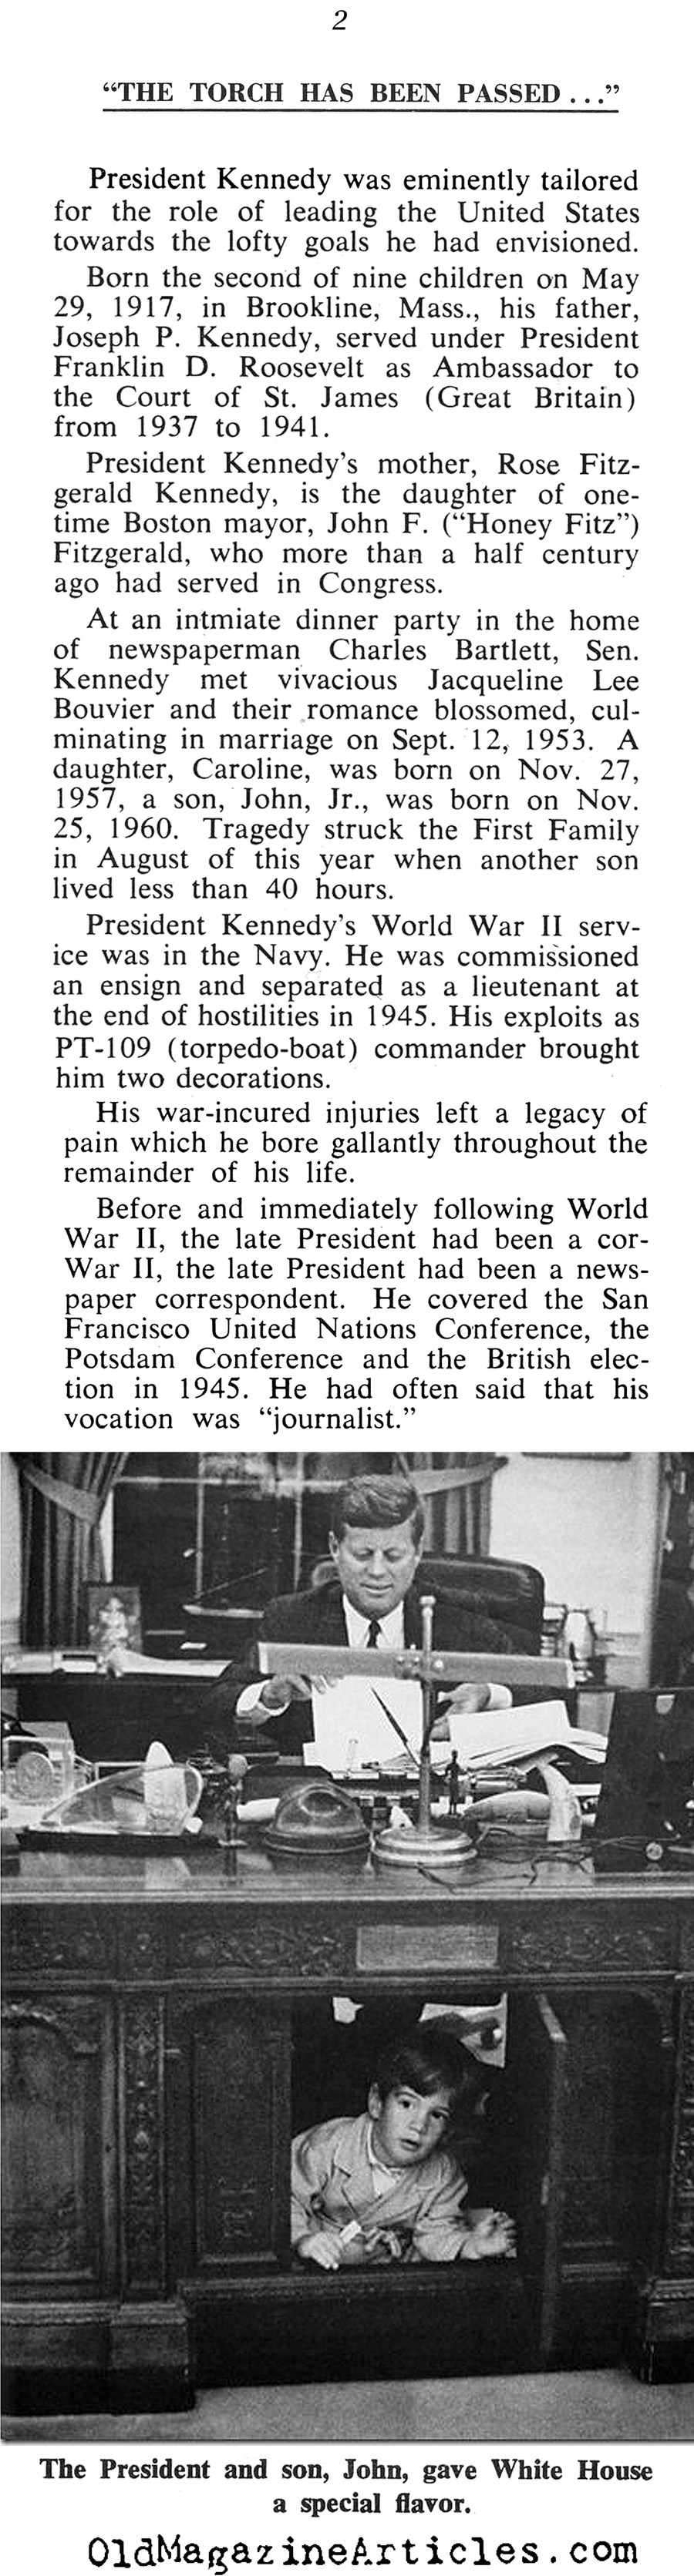 ''The Torch is Passed'' (The Washington World, 1963)